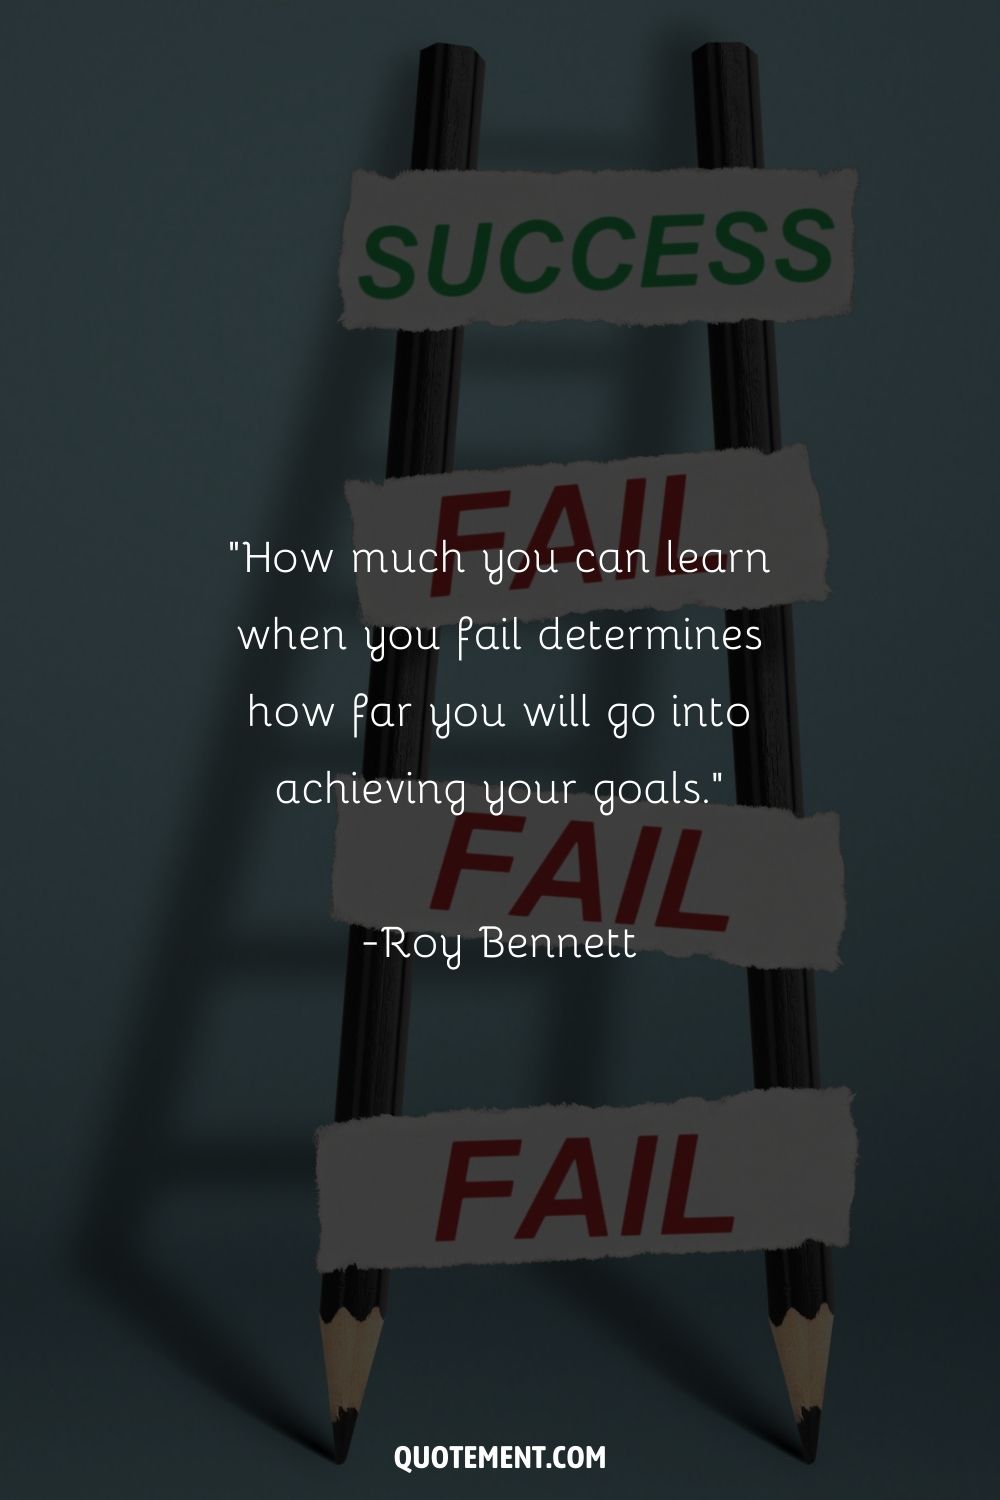 “How much you can learn when you fail determines how far you will go into achieving your goals.” ― Roy Bennett